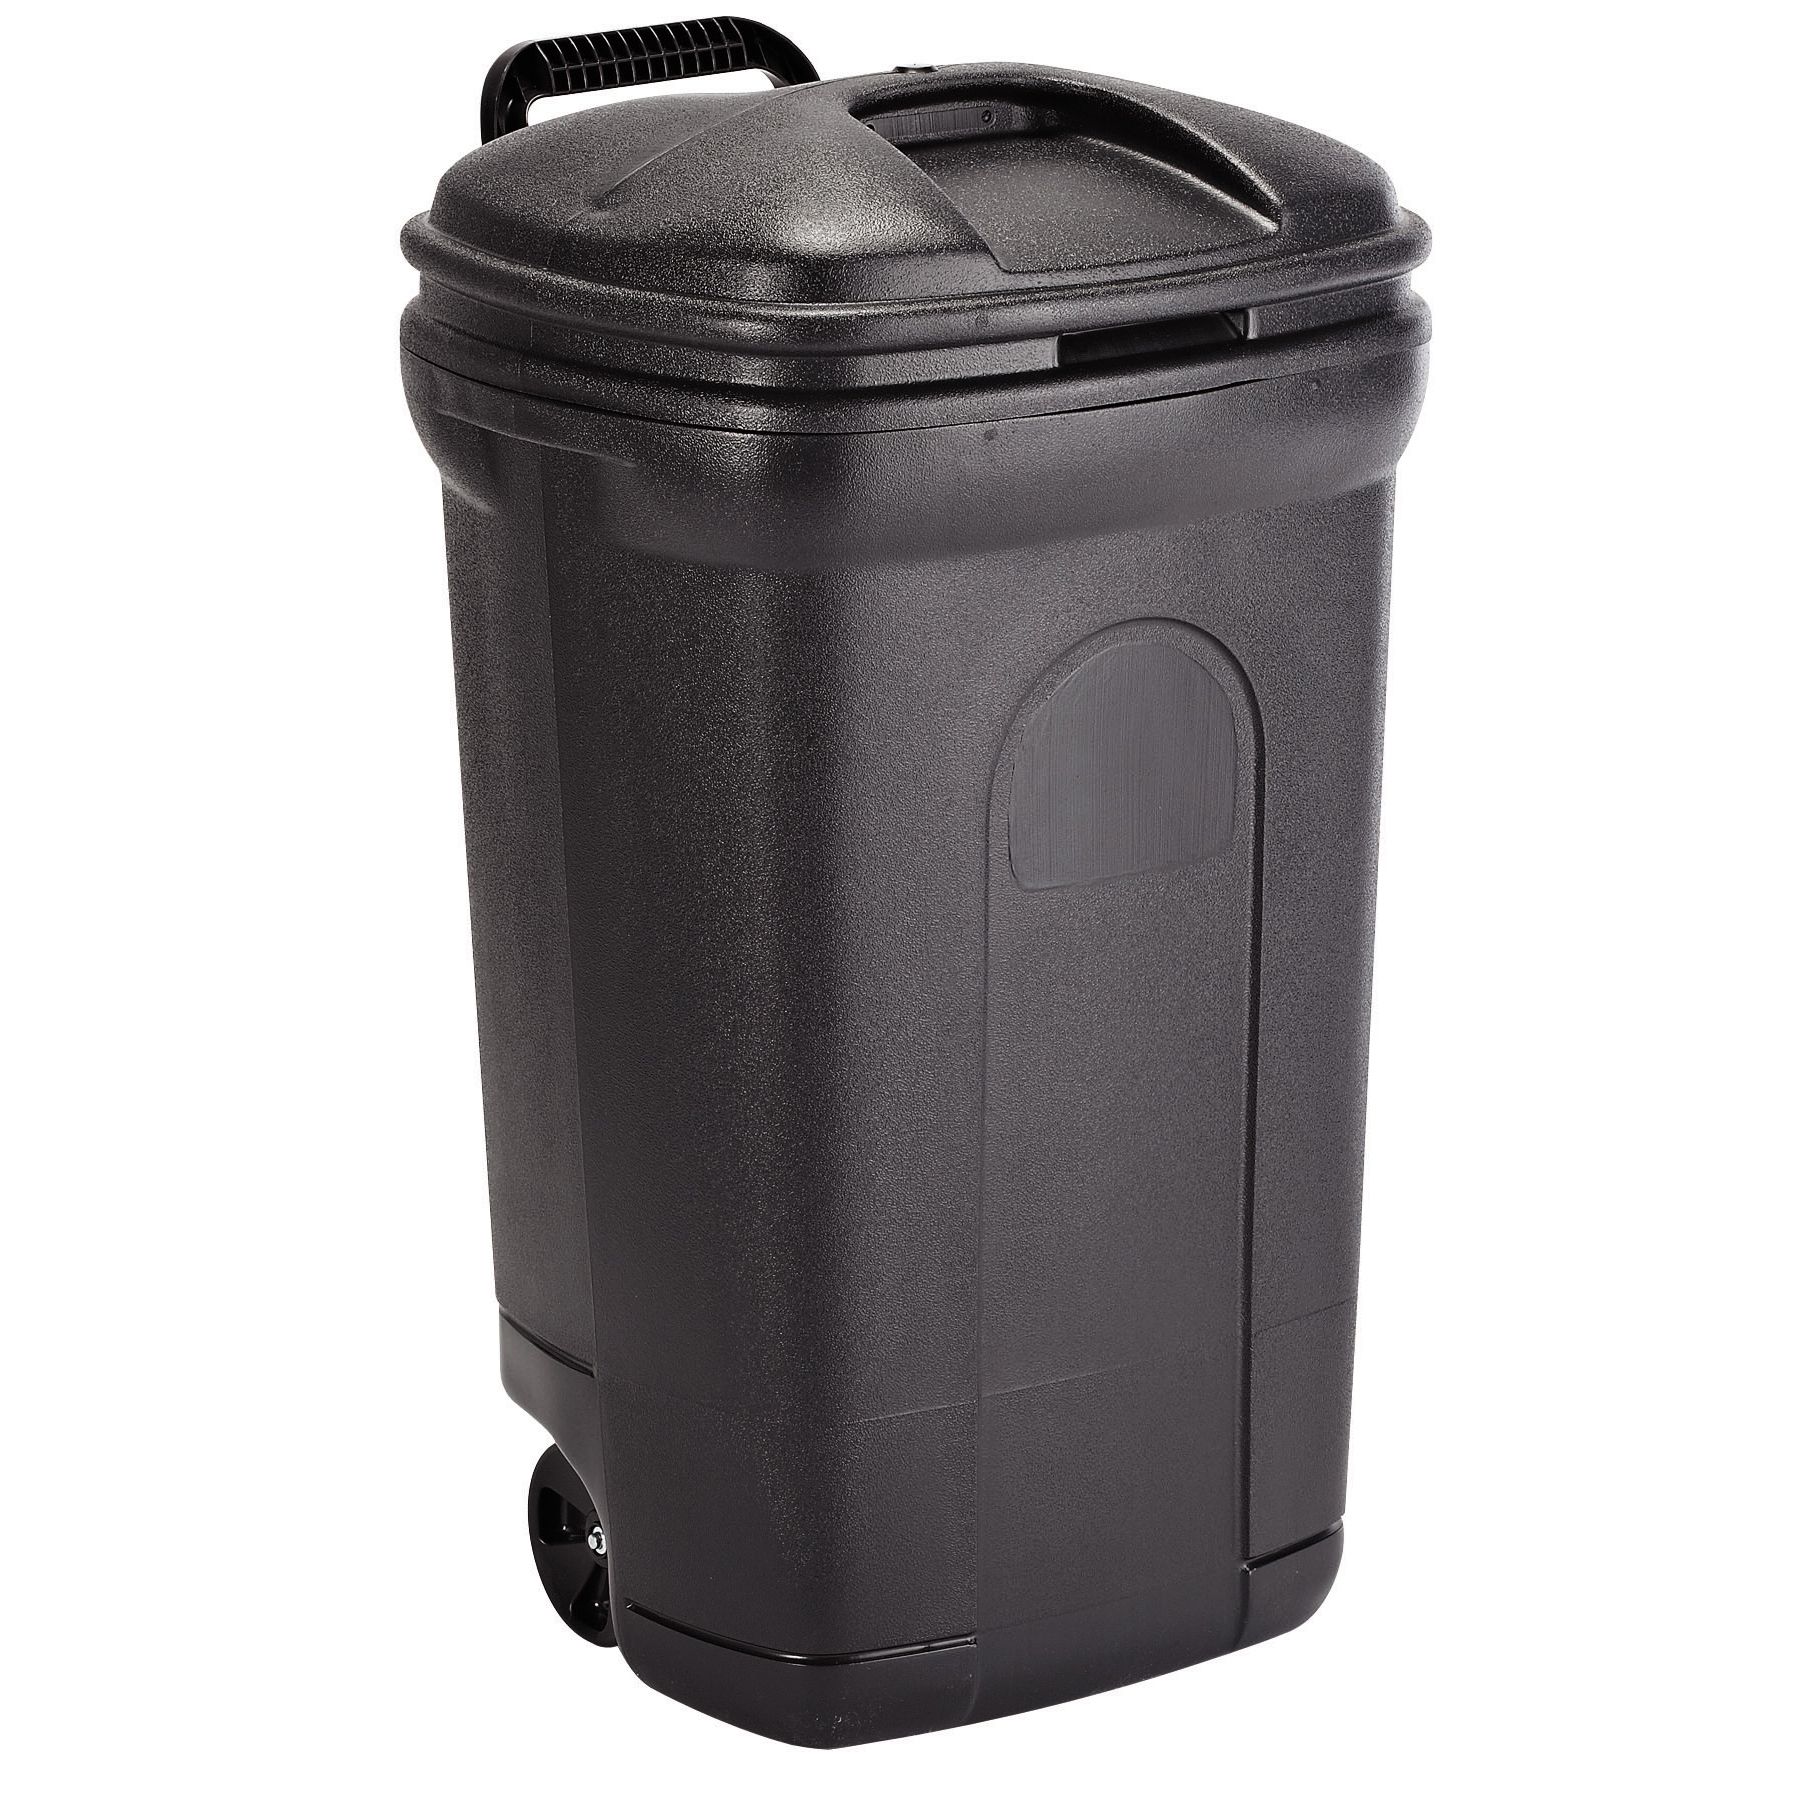 United Solutions TB0014 35 Gallon Trash Can with Wheels